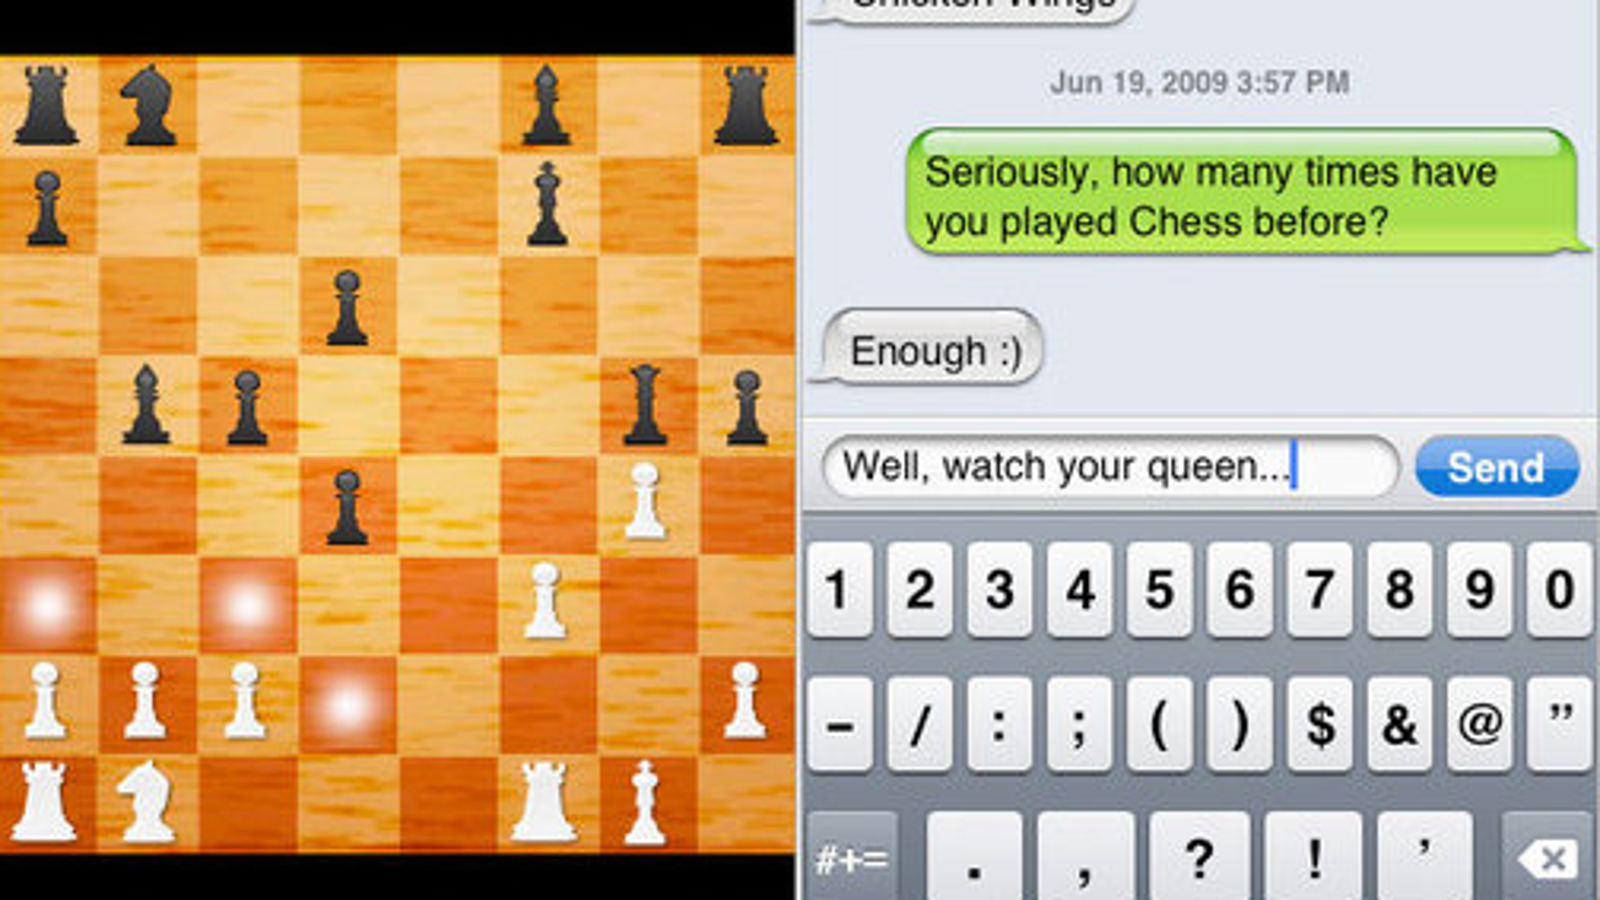 Chess Online Multiplayer download the last version for apple